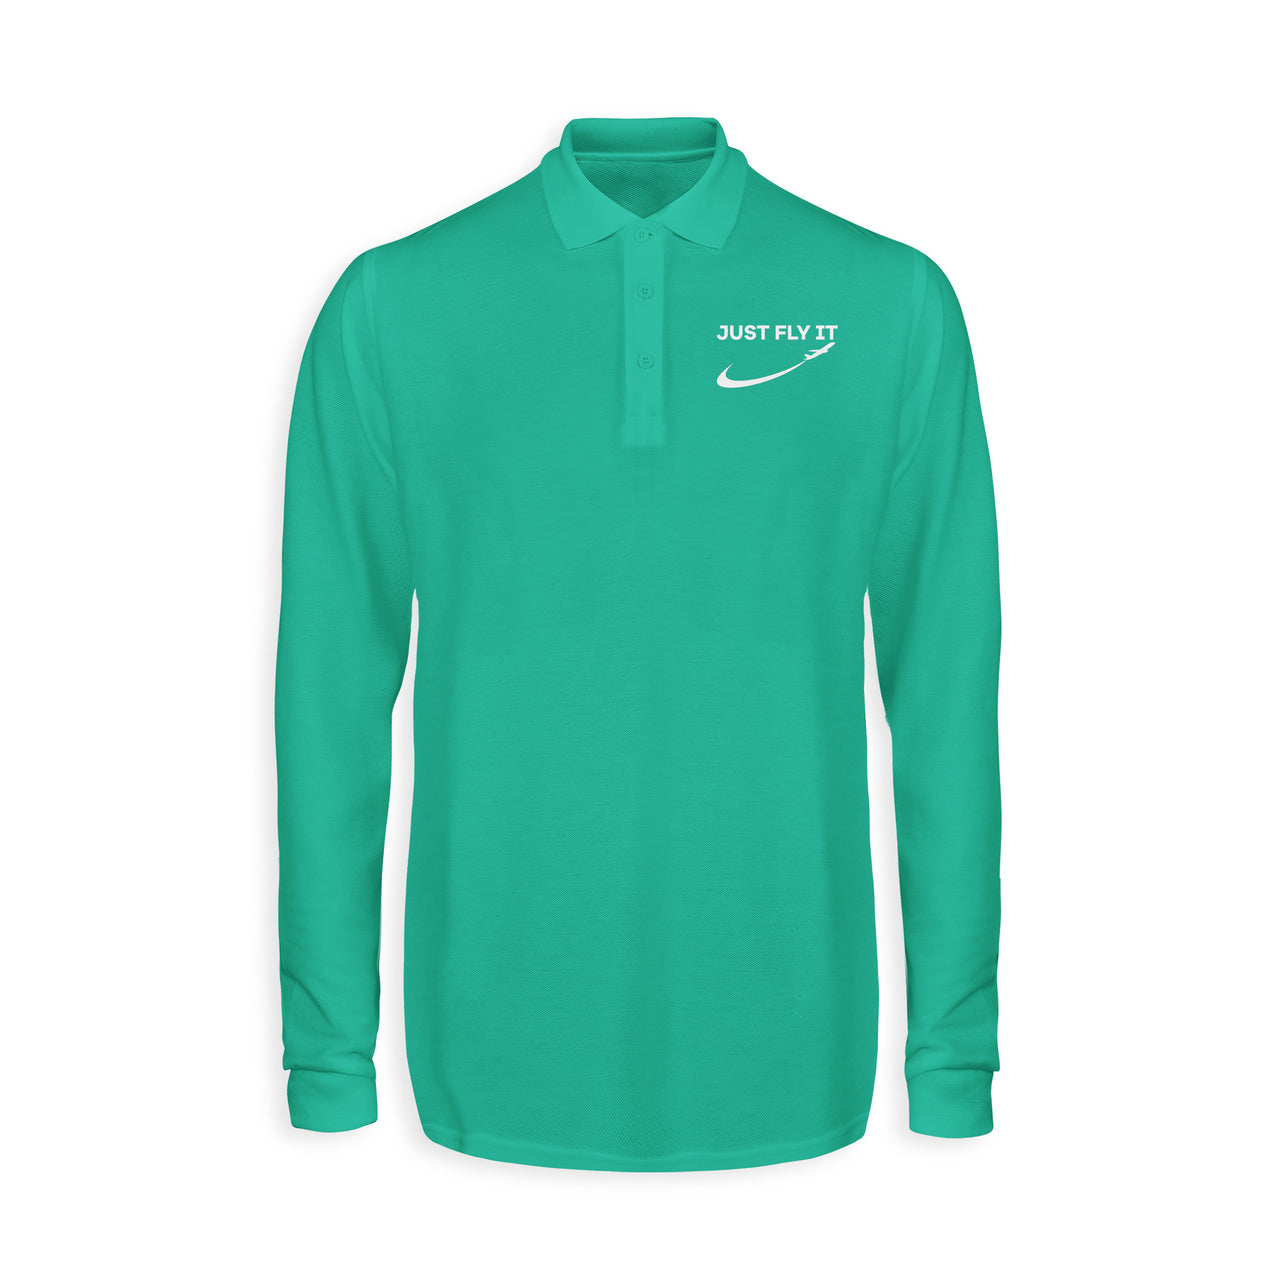 Just Fly It 2 Designed Long Sleeve Polo T-Shirts